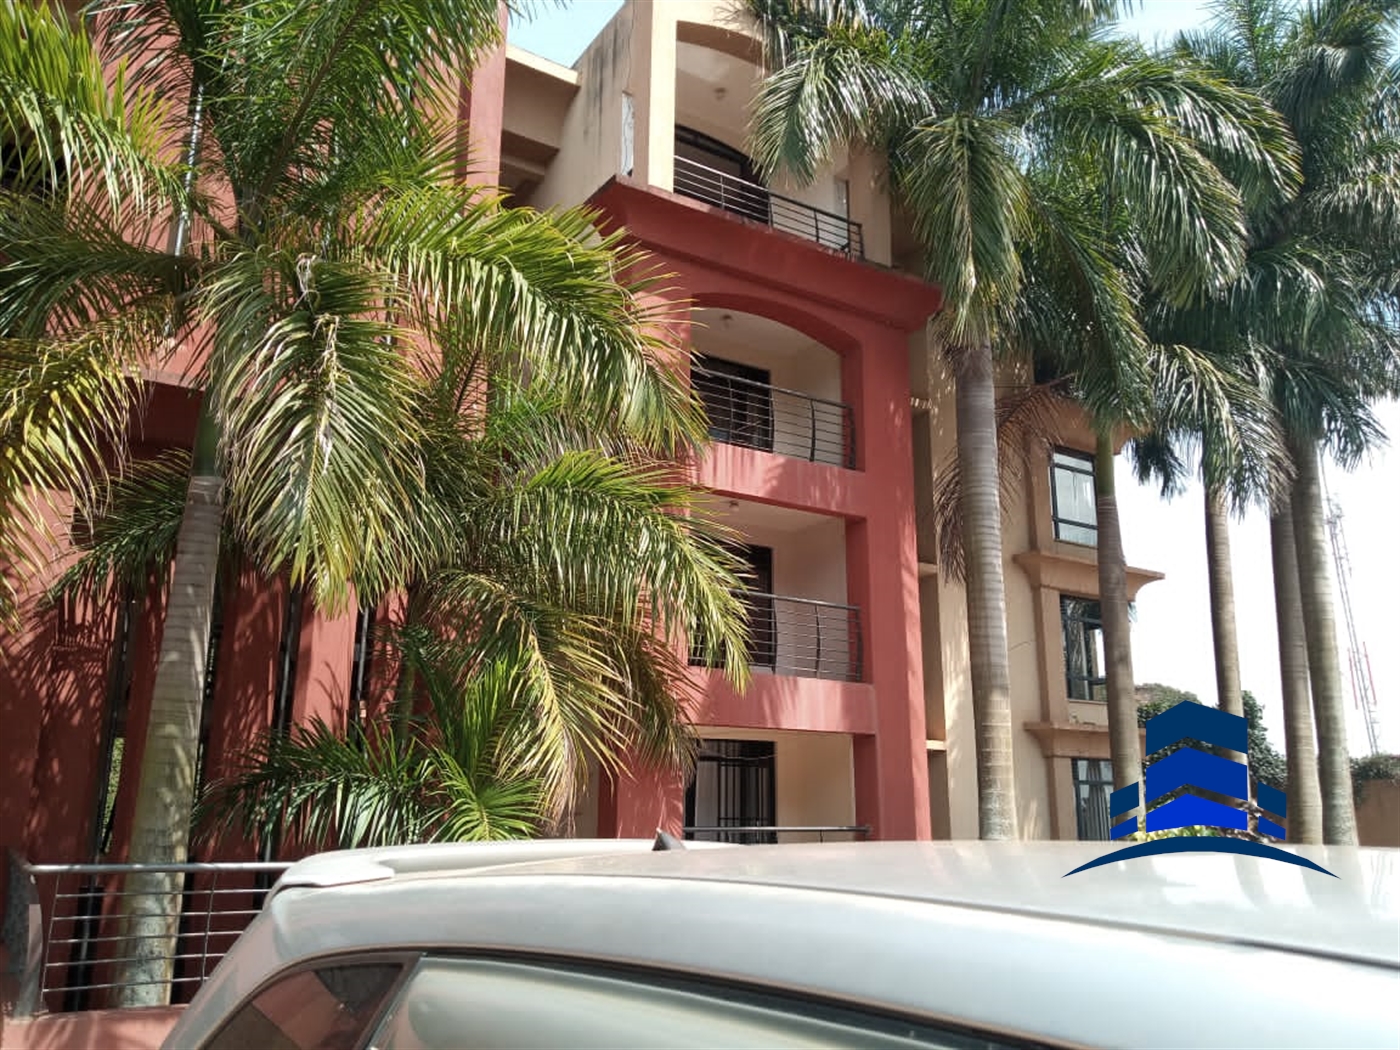 Apartment for sale in Lubowa Kampala